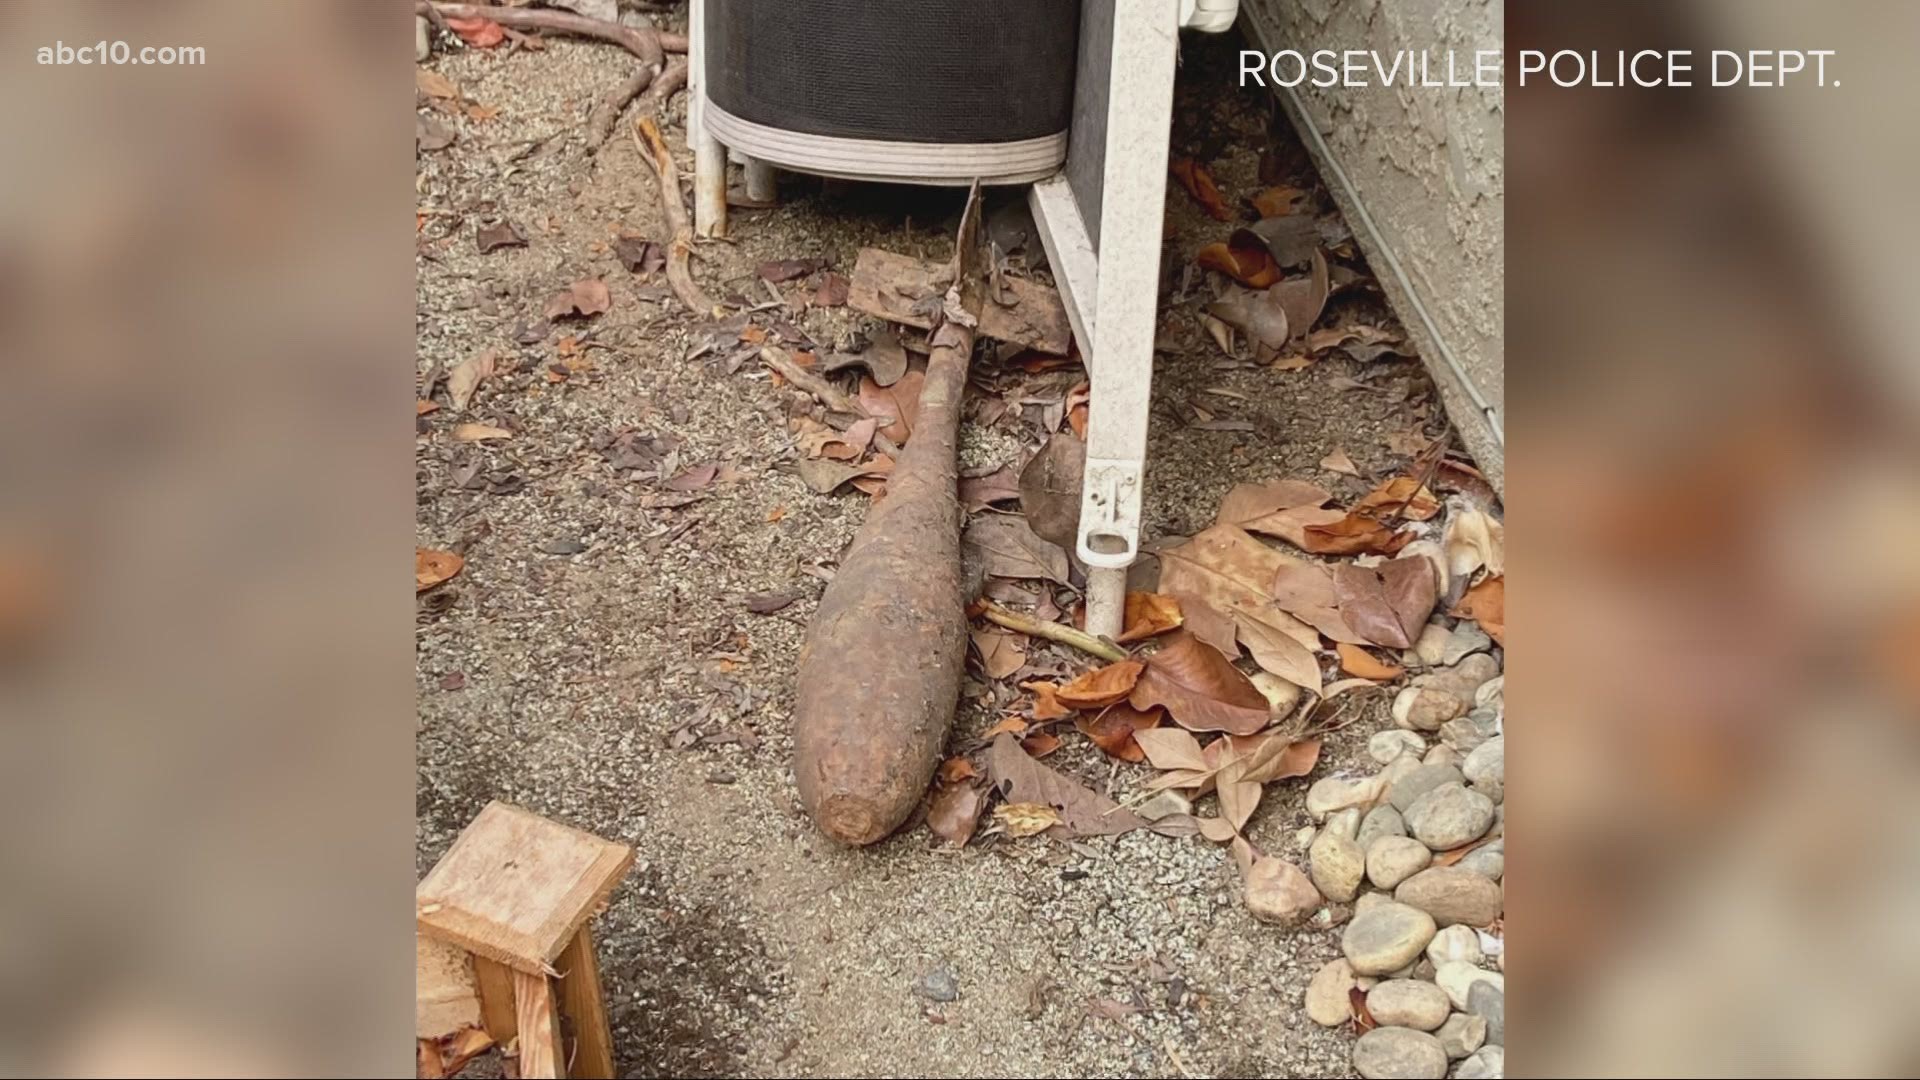 Roseville police responded to the second call of a resident discovering an explosive device near their home.